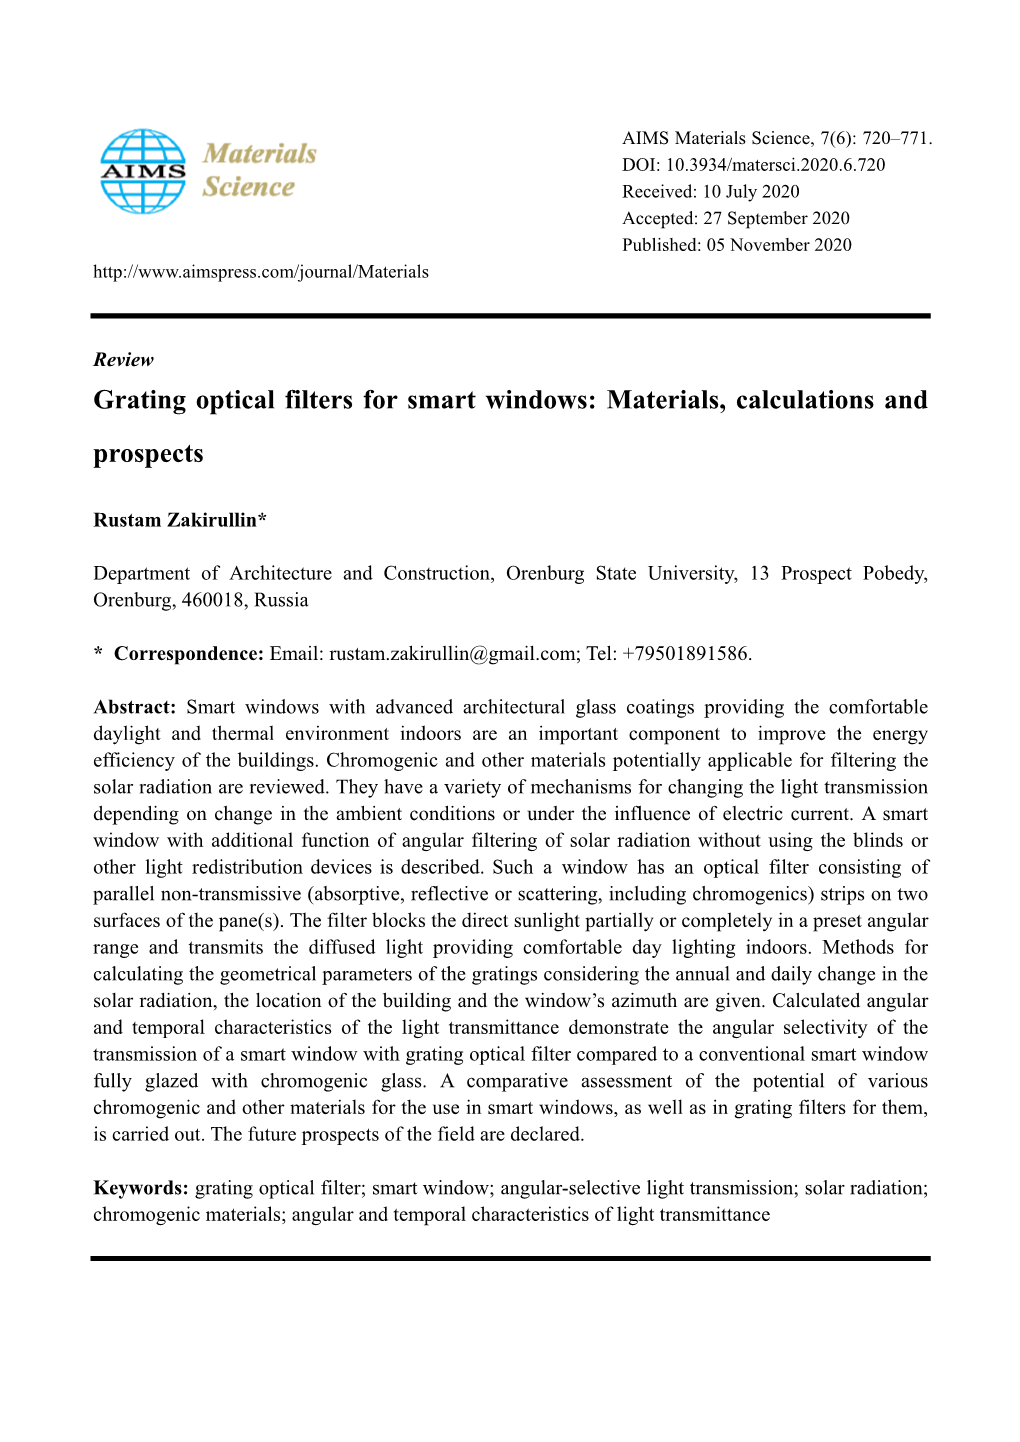 Grating Optical Filters for Smart Windows: Materials, Calculations and Prospects